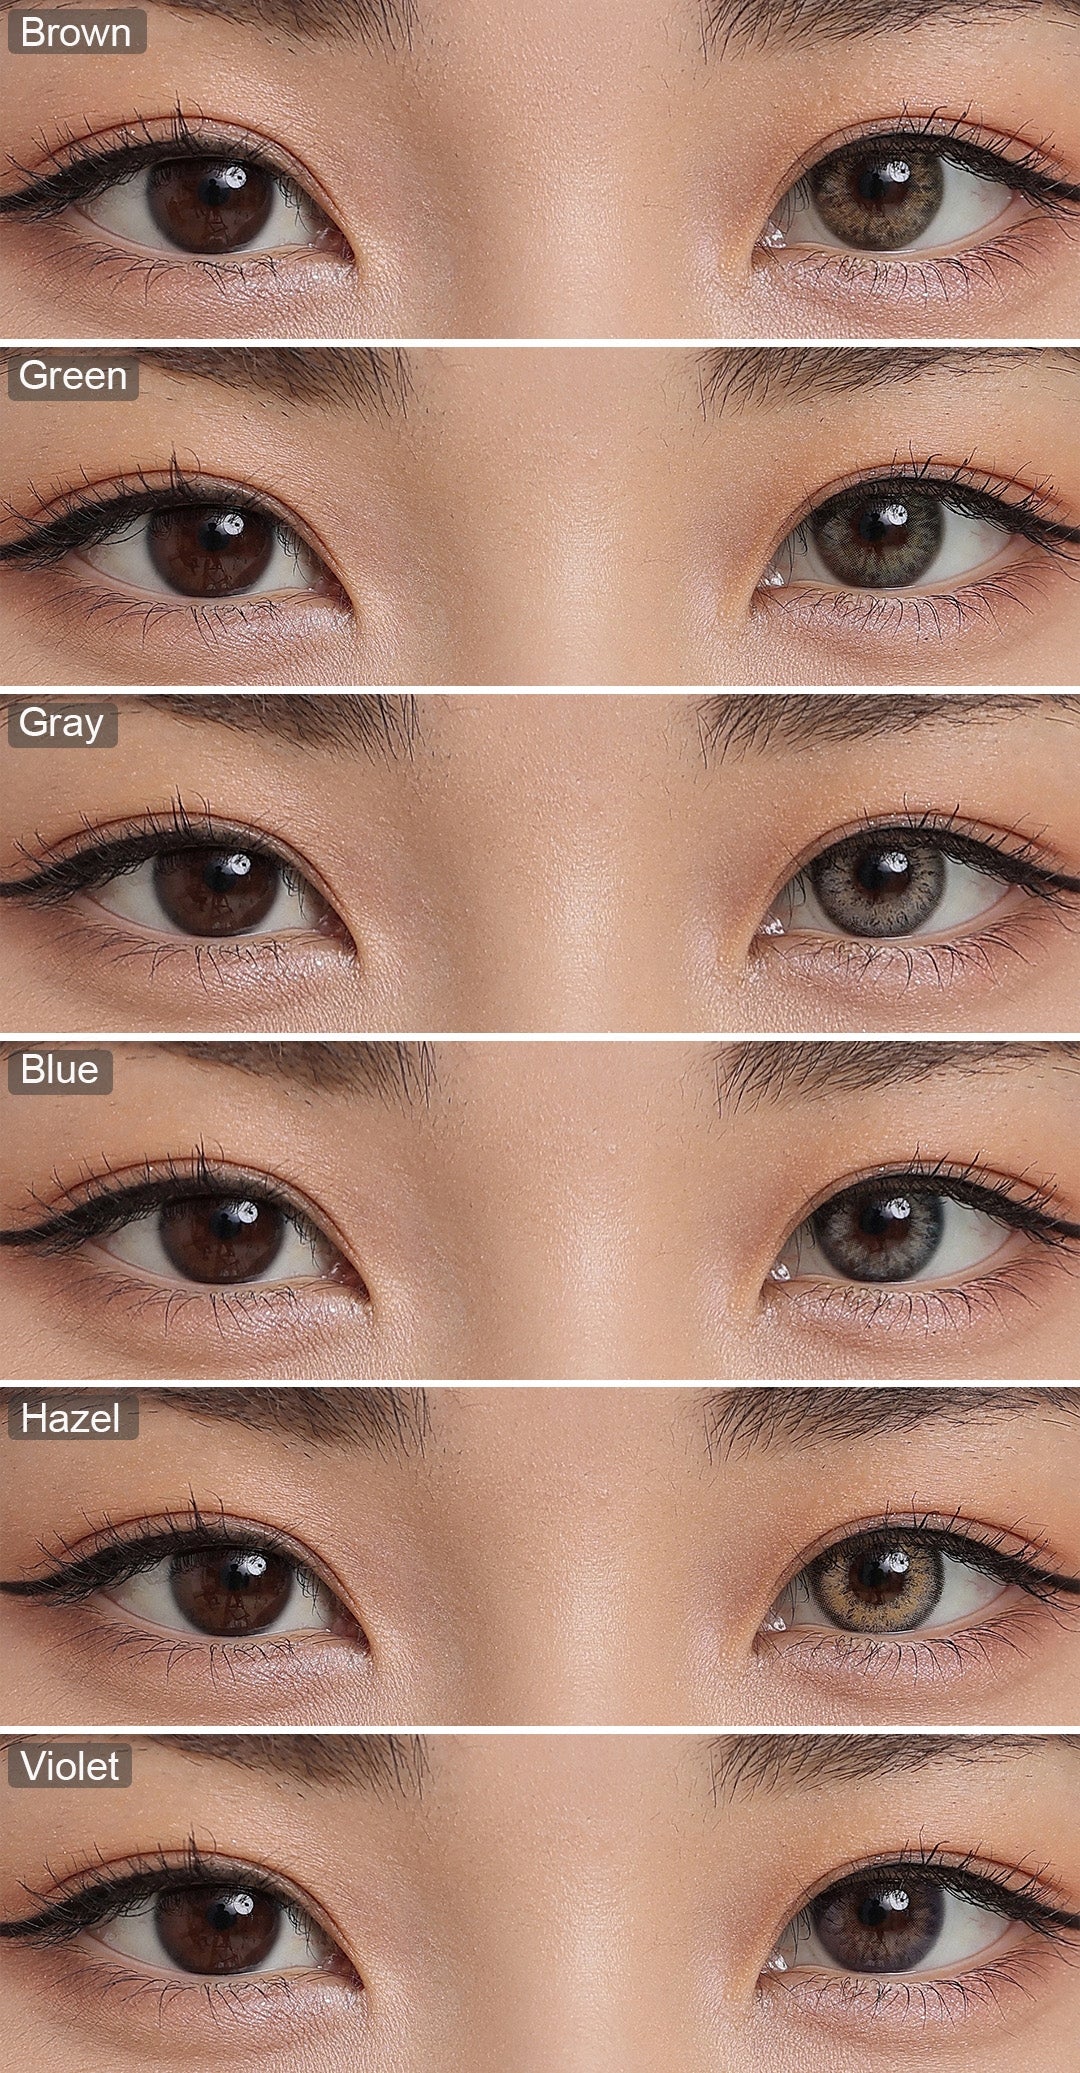 A display of Gleam colored contact lenses in Brown, Green, Violet, Blue, Hazel and Gray, each shown both as a lens swatch and wearing comparison in a close-up of a model's eye , with the color names labeled.